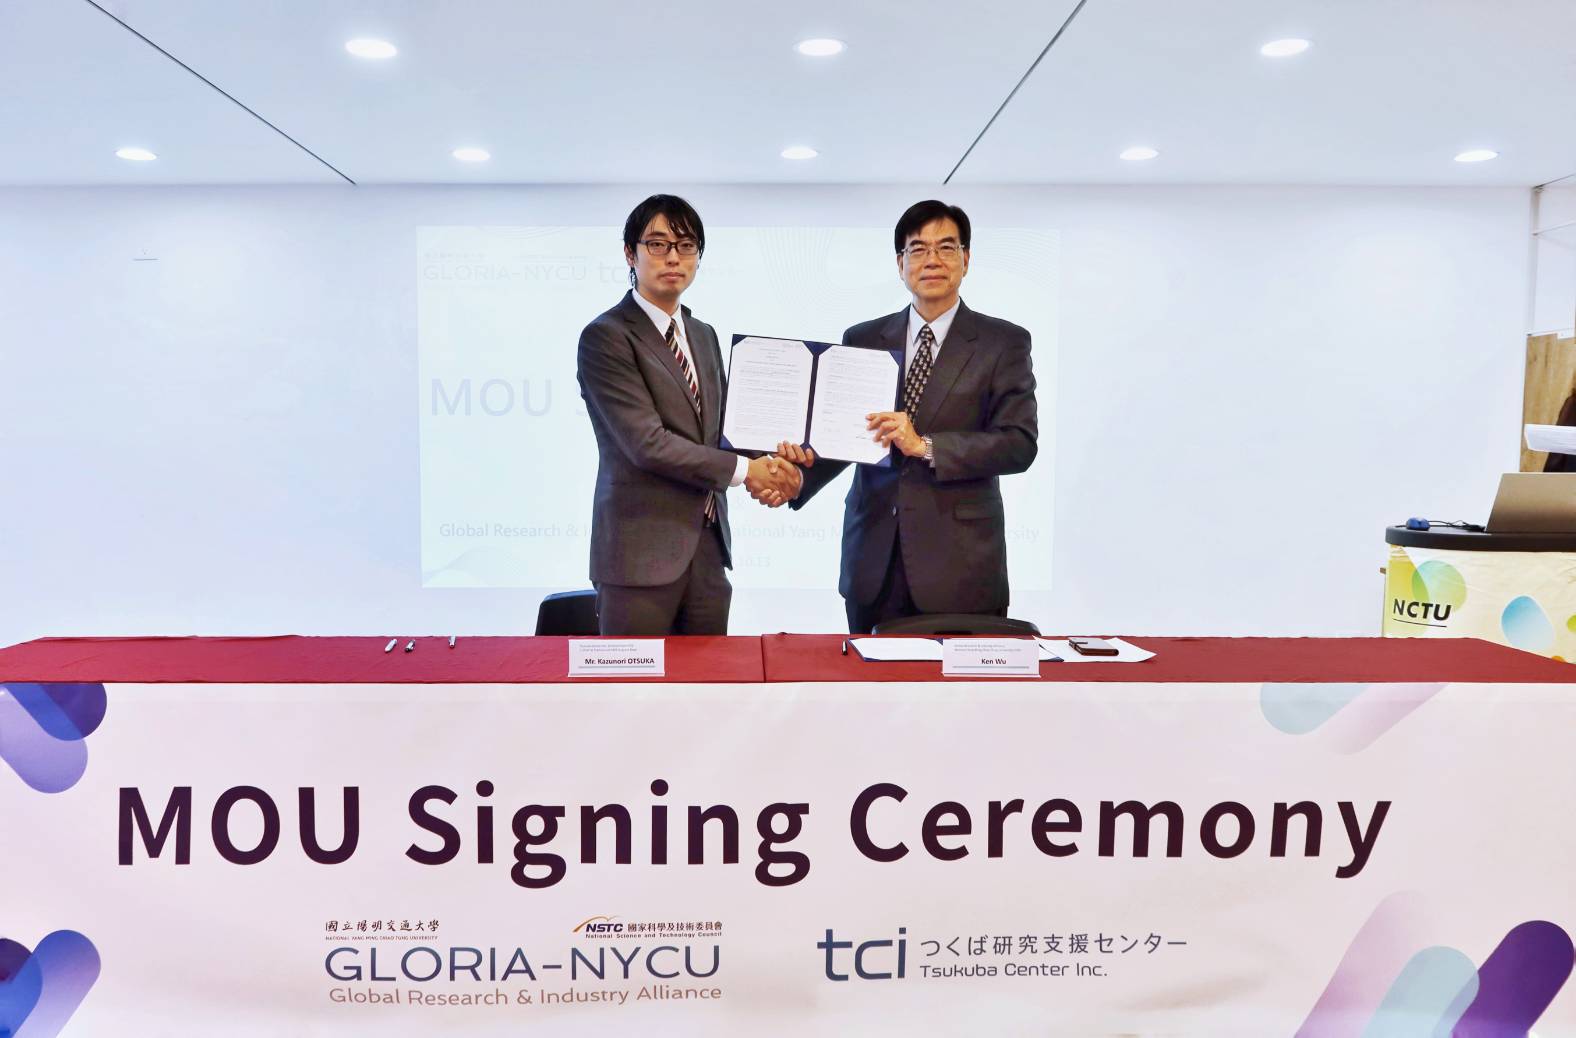 Memorandum of Understanding for Mutual Cooperation Signed between Global Research & Industry Alliance, National Yang Ming Chiao Tung University and Tsukuba Center Inc. Inc., Japan.